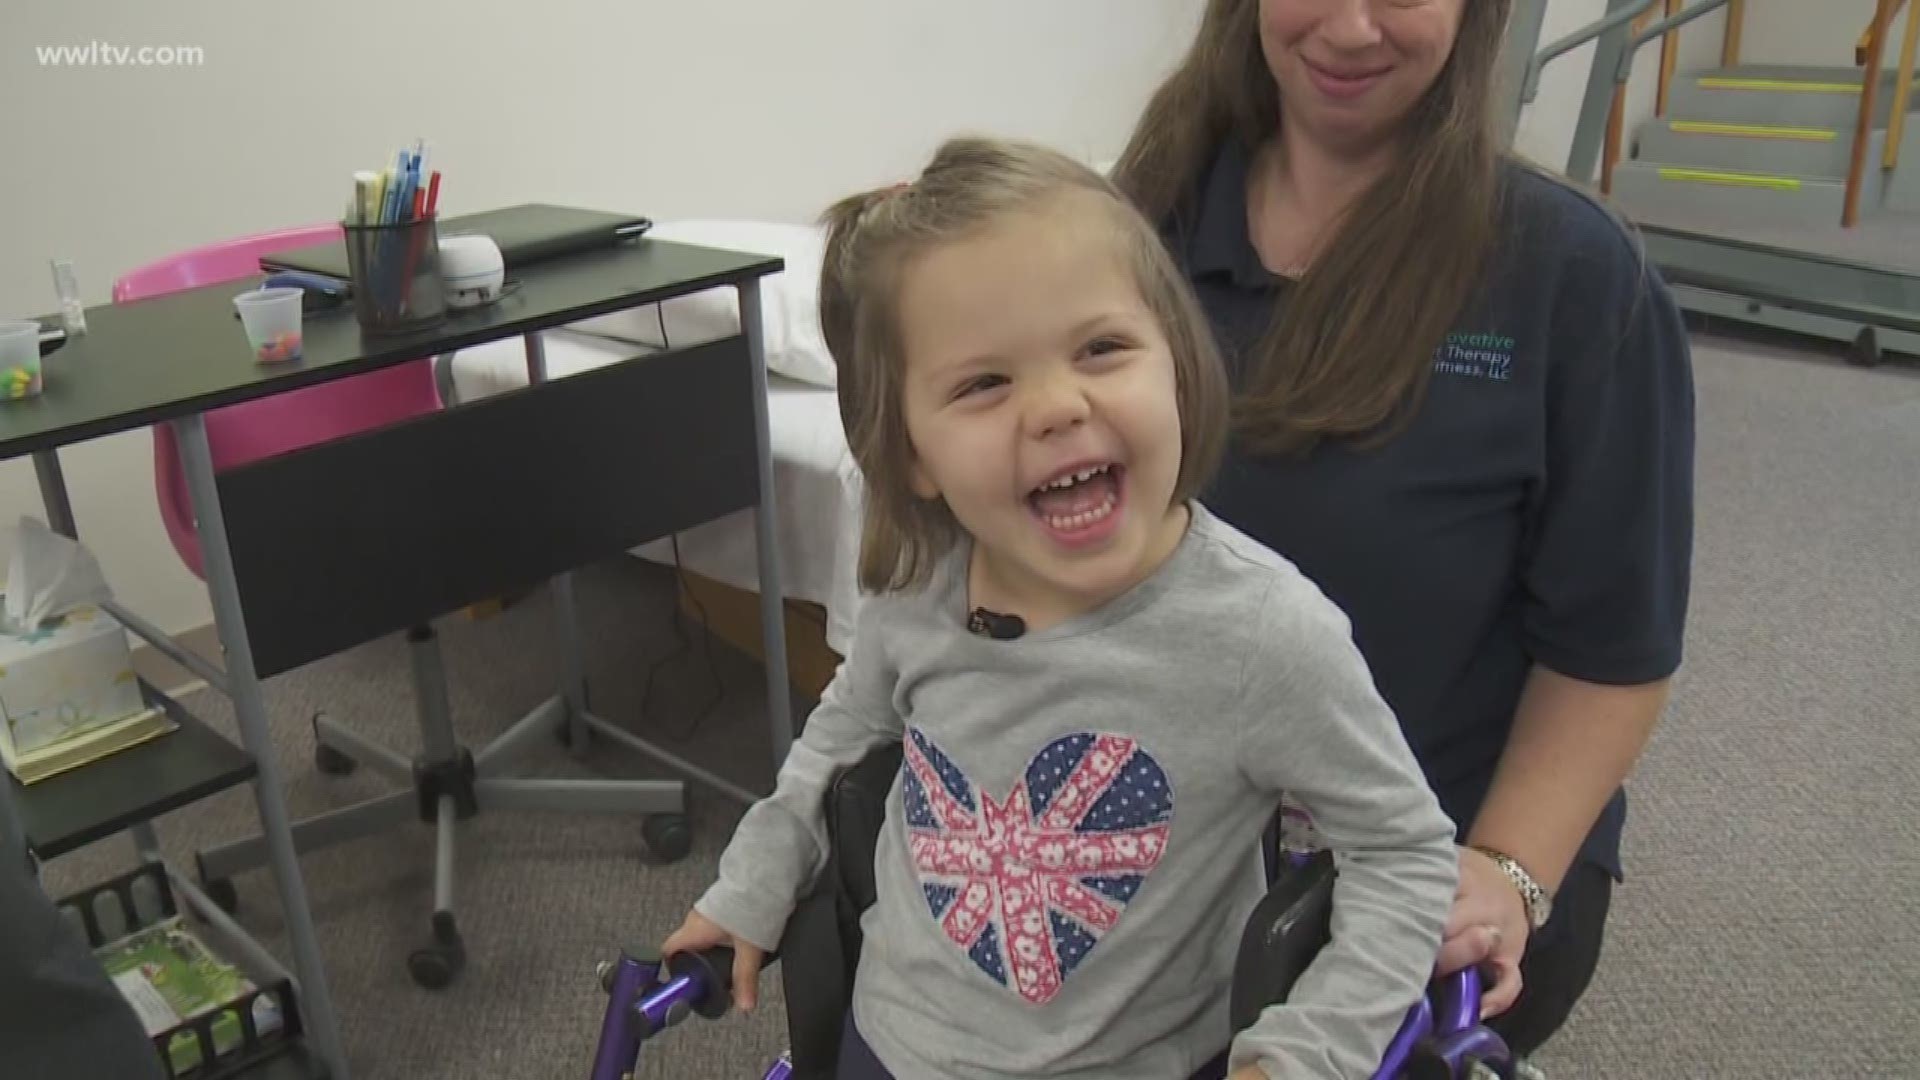 A unique surgery has given a young Slidell girl a chance to walk on her own after a tough battle.